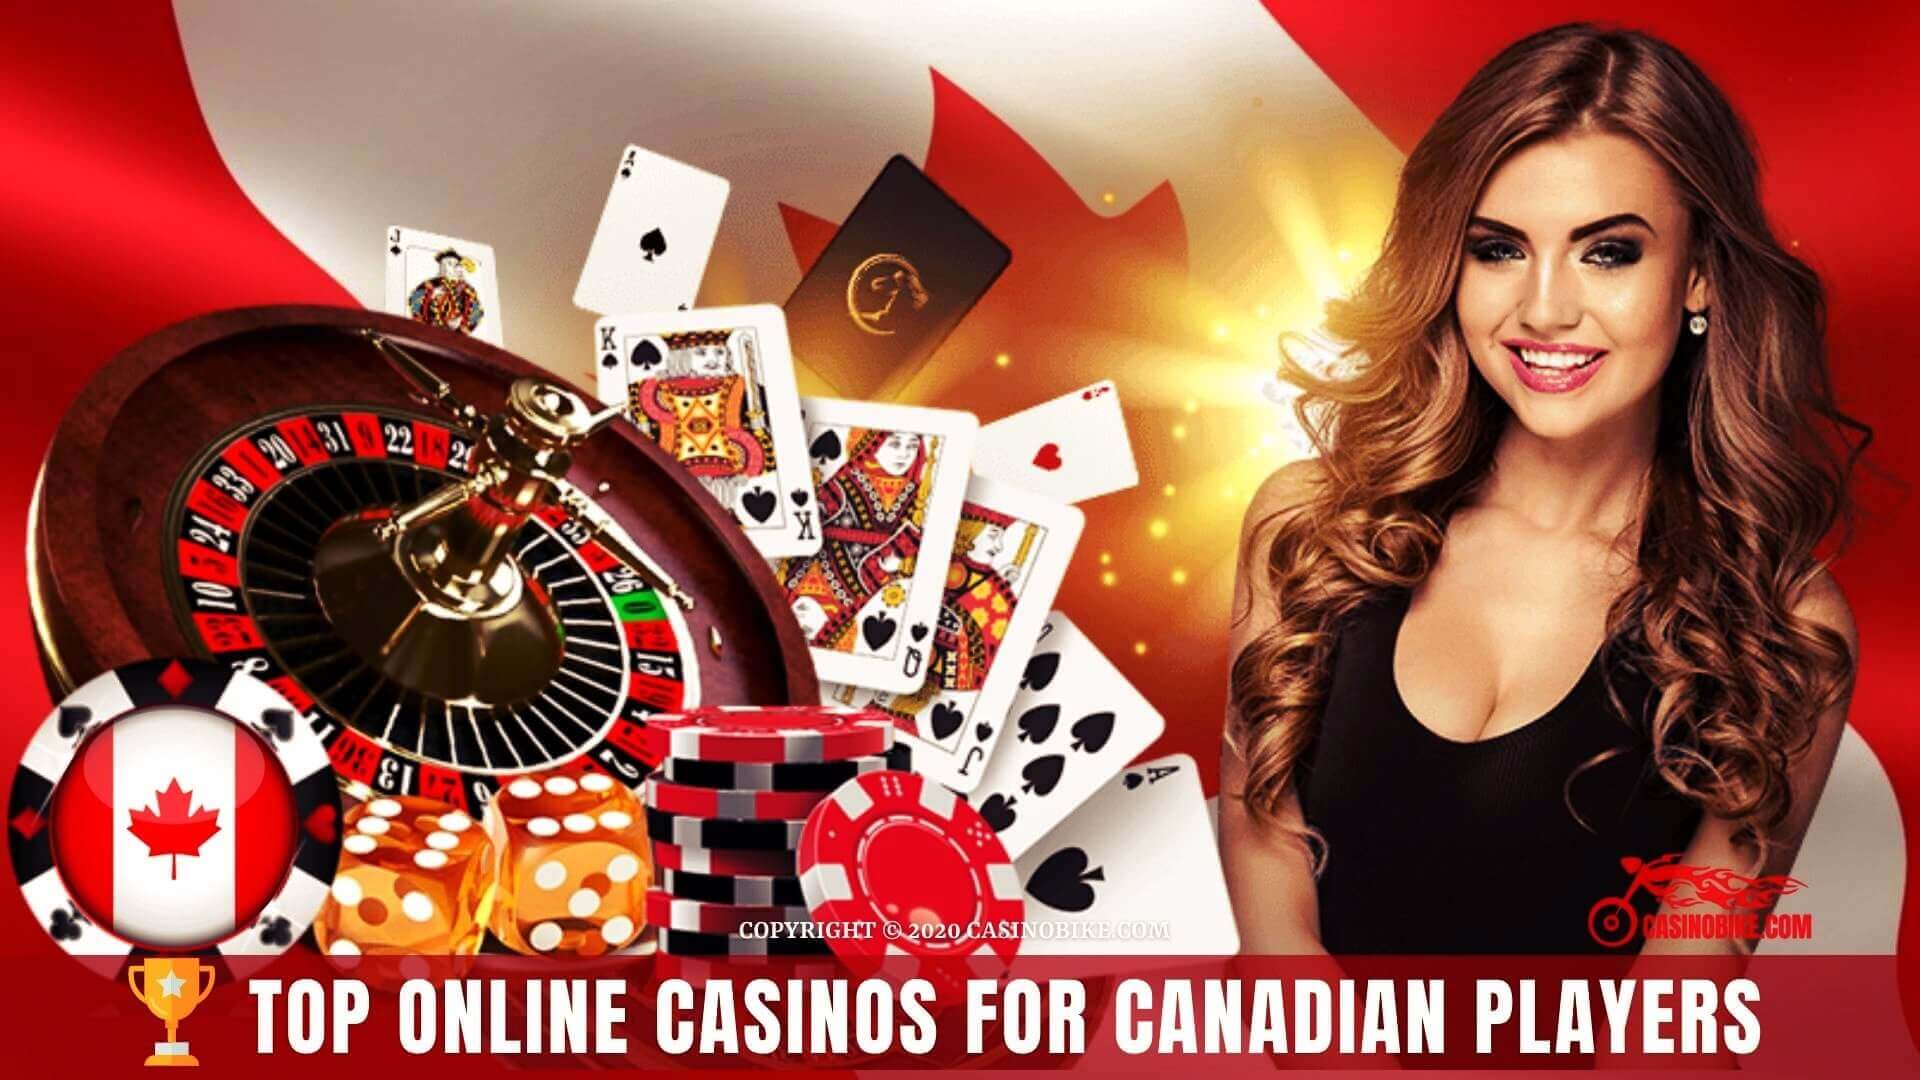 5 Lessons You Can Learn From Bing About casino in UK